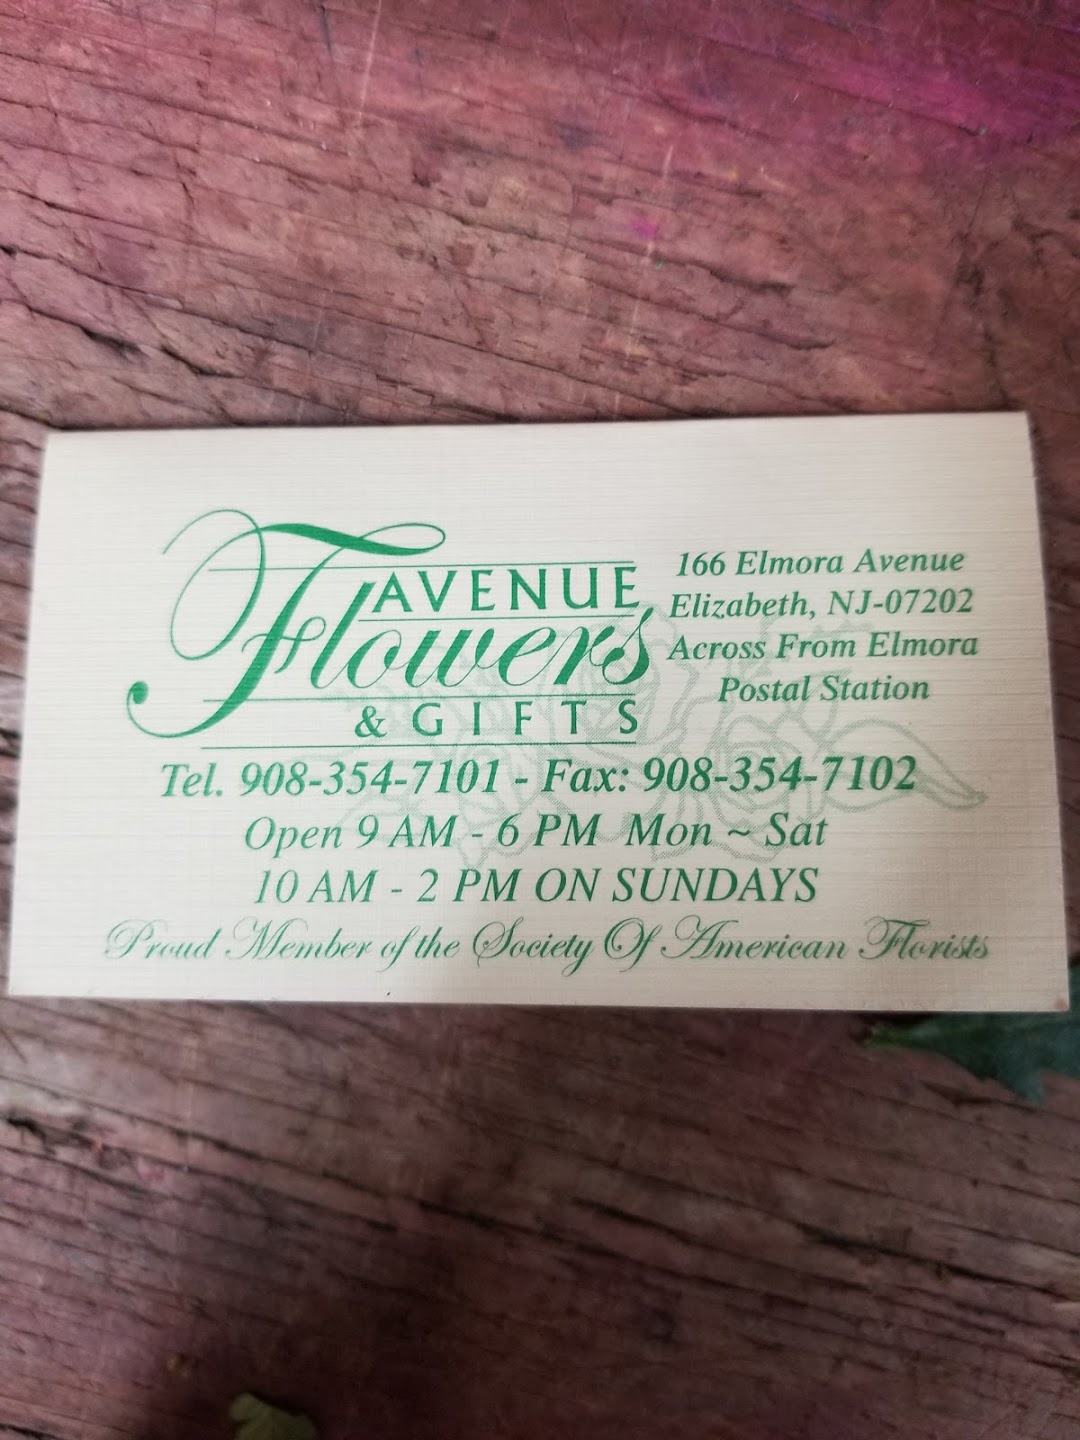 Avenue Flowers & Gifts